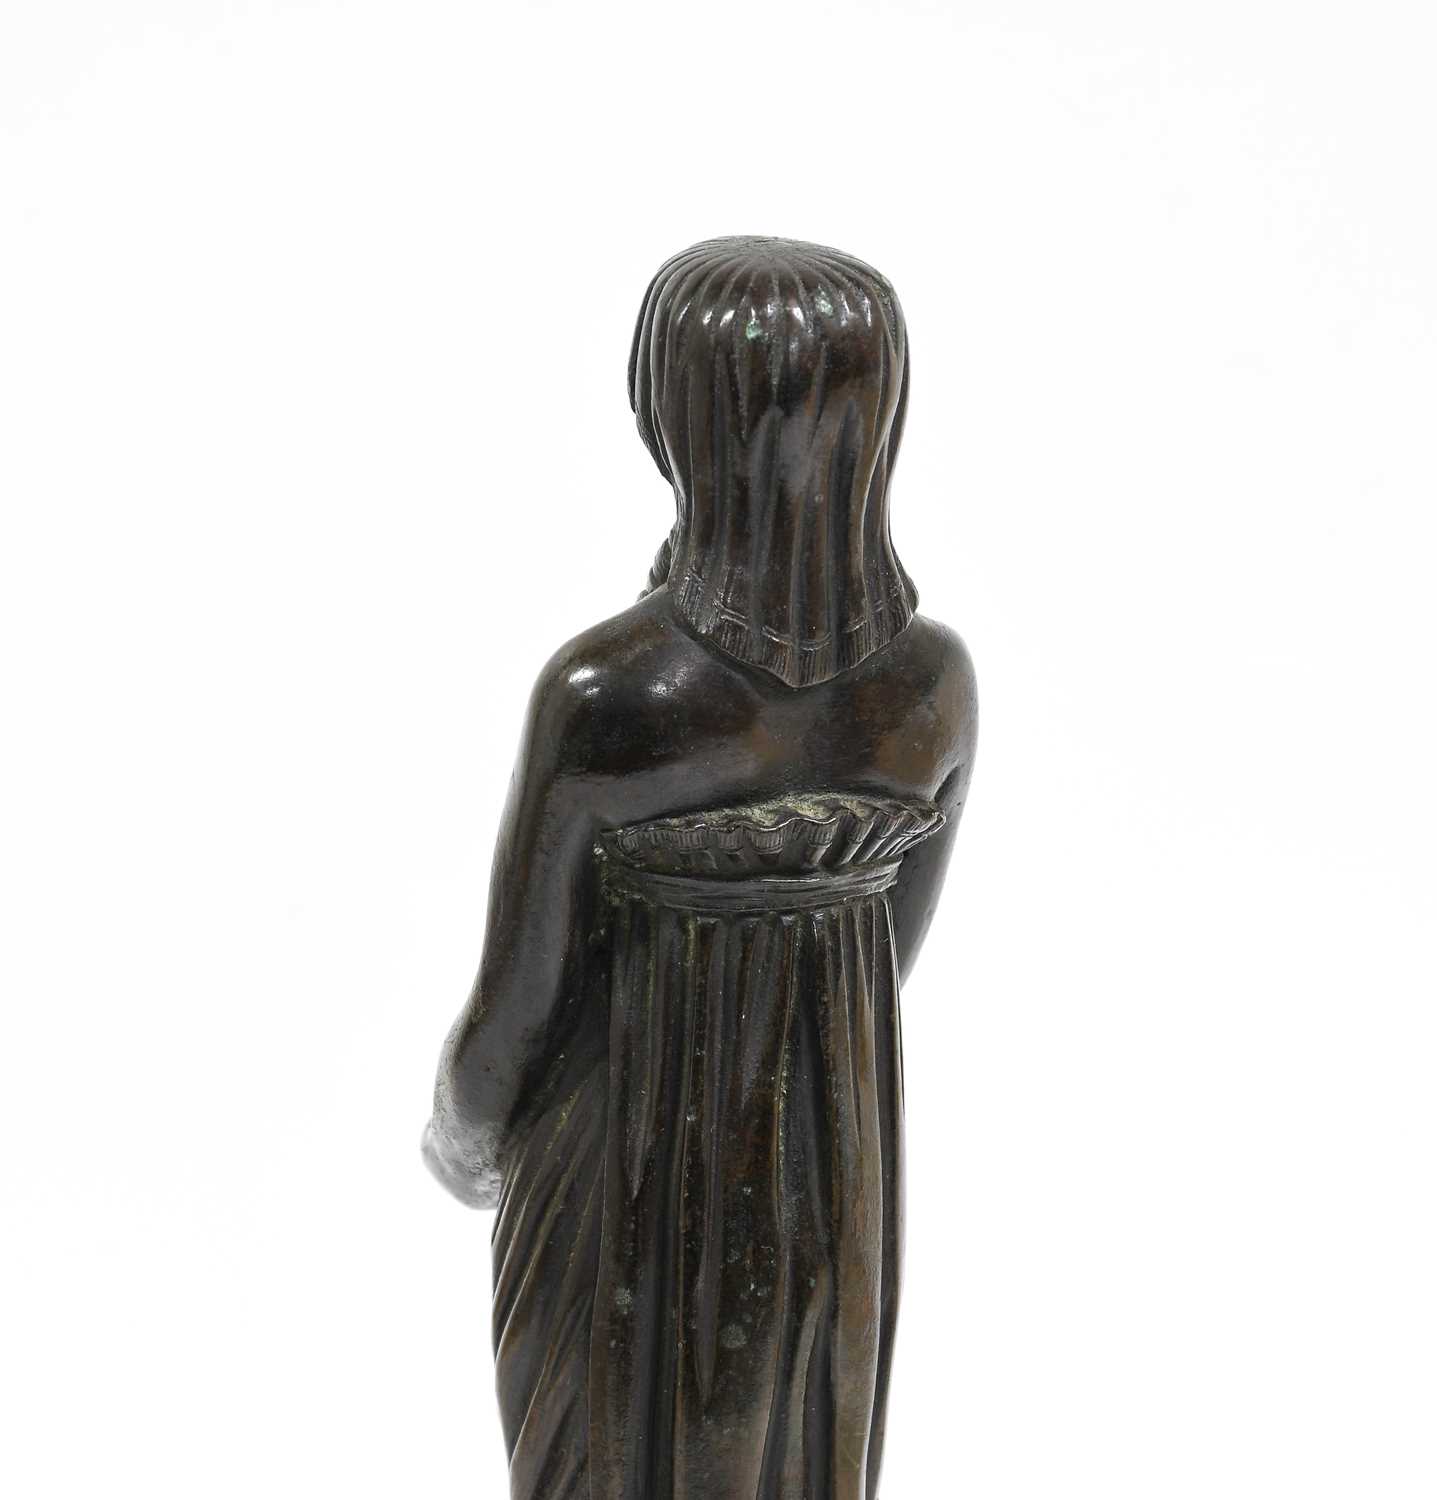 French School (early 19th century): A Bronze Figure of a Maiden, standing wearing flowing robes - Image 2 of 2